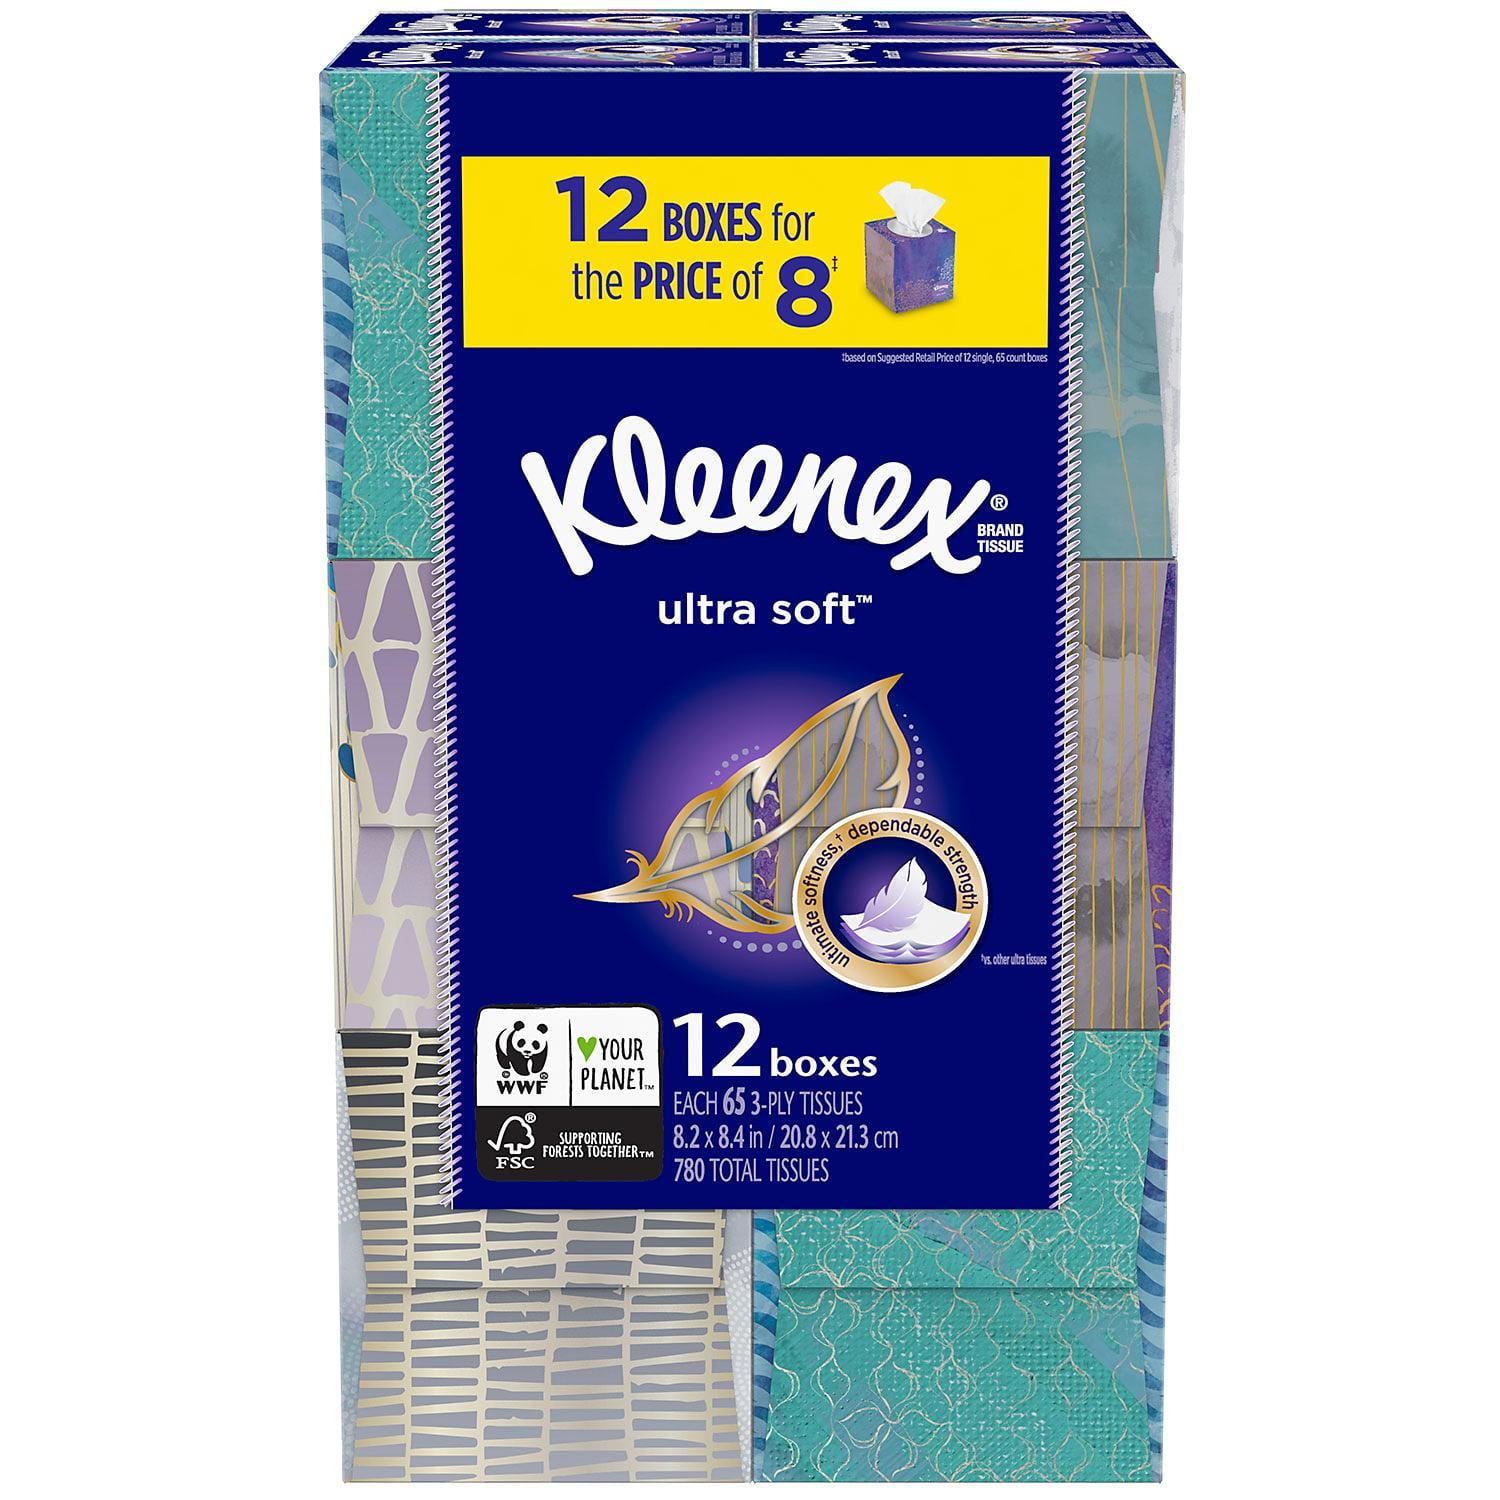 cleanx tissues